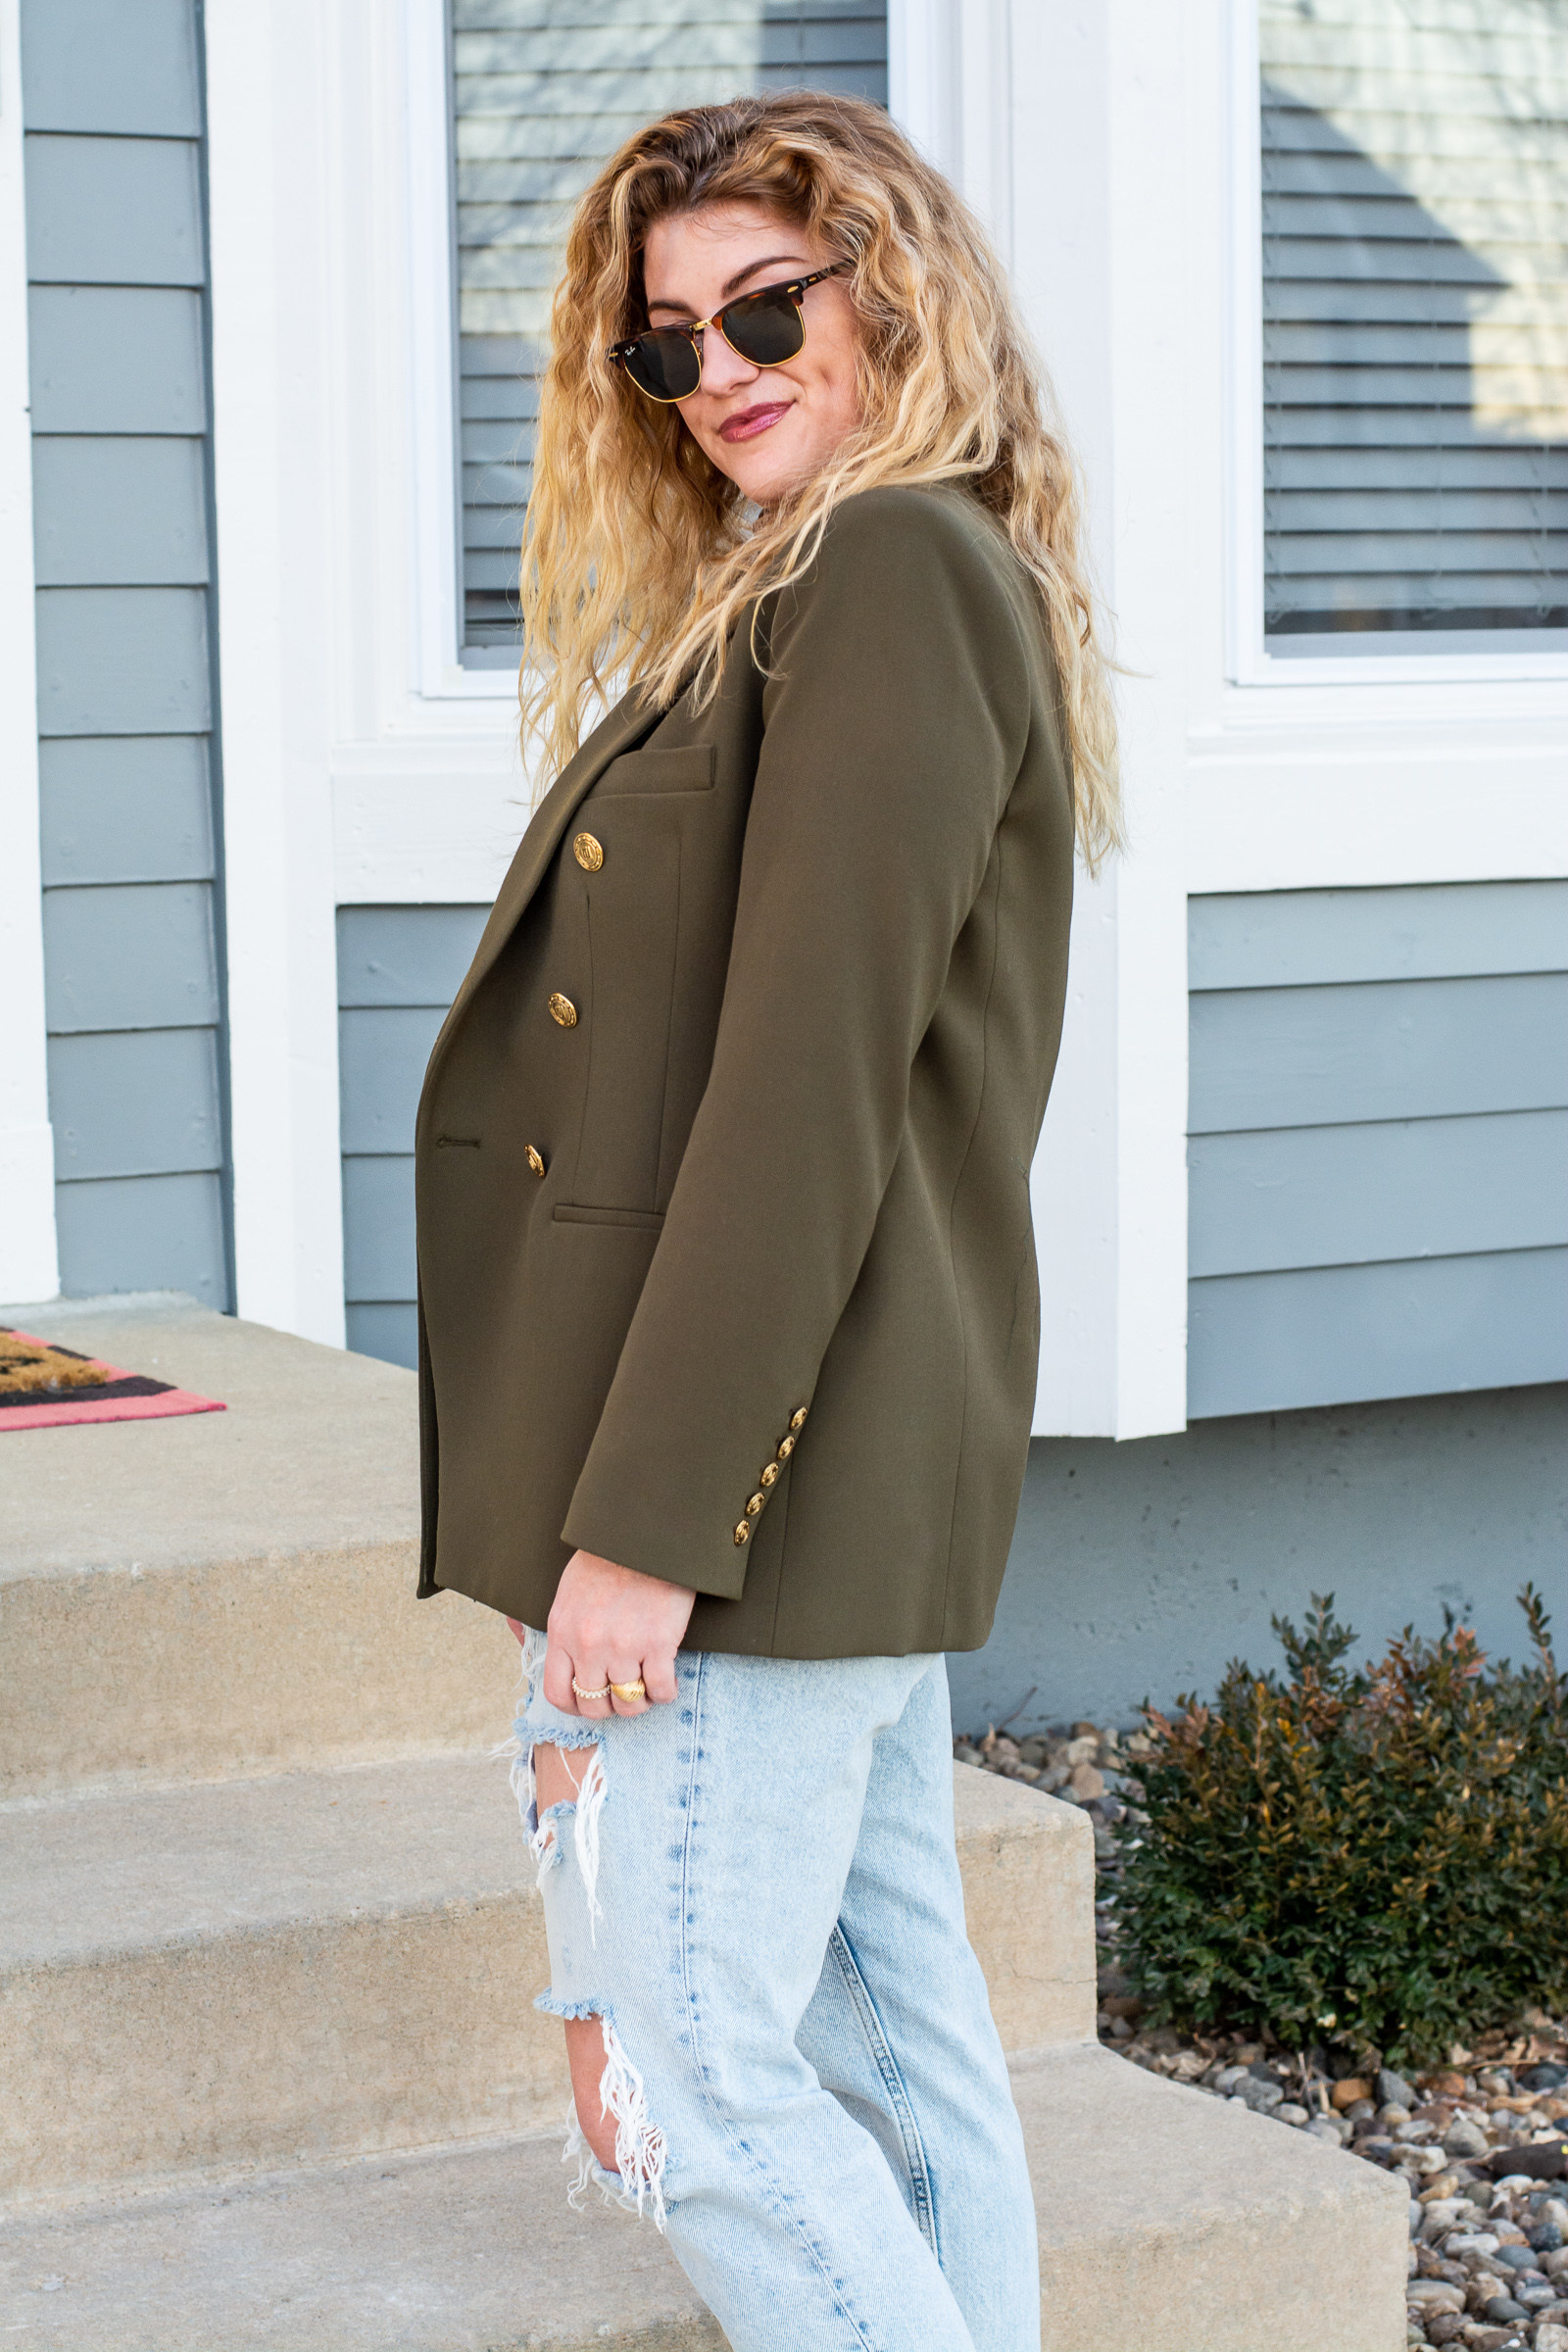 Ripped Denim with an Olive Green Blazer. | LSR